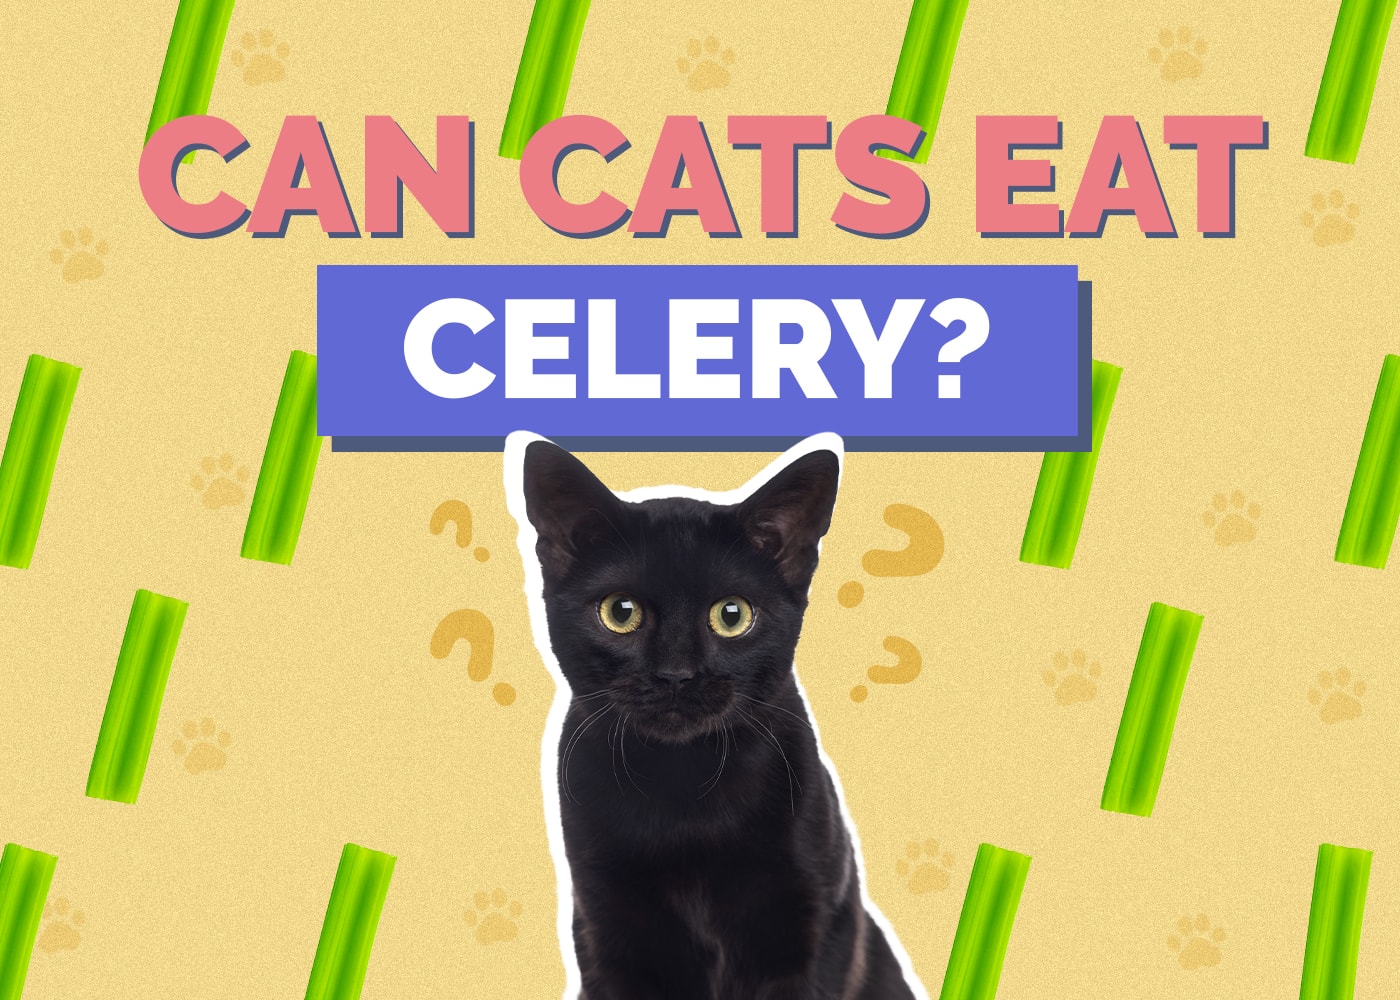 Can Cats Eat celery